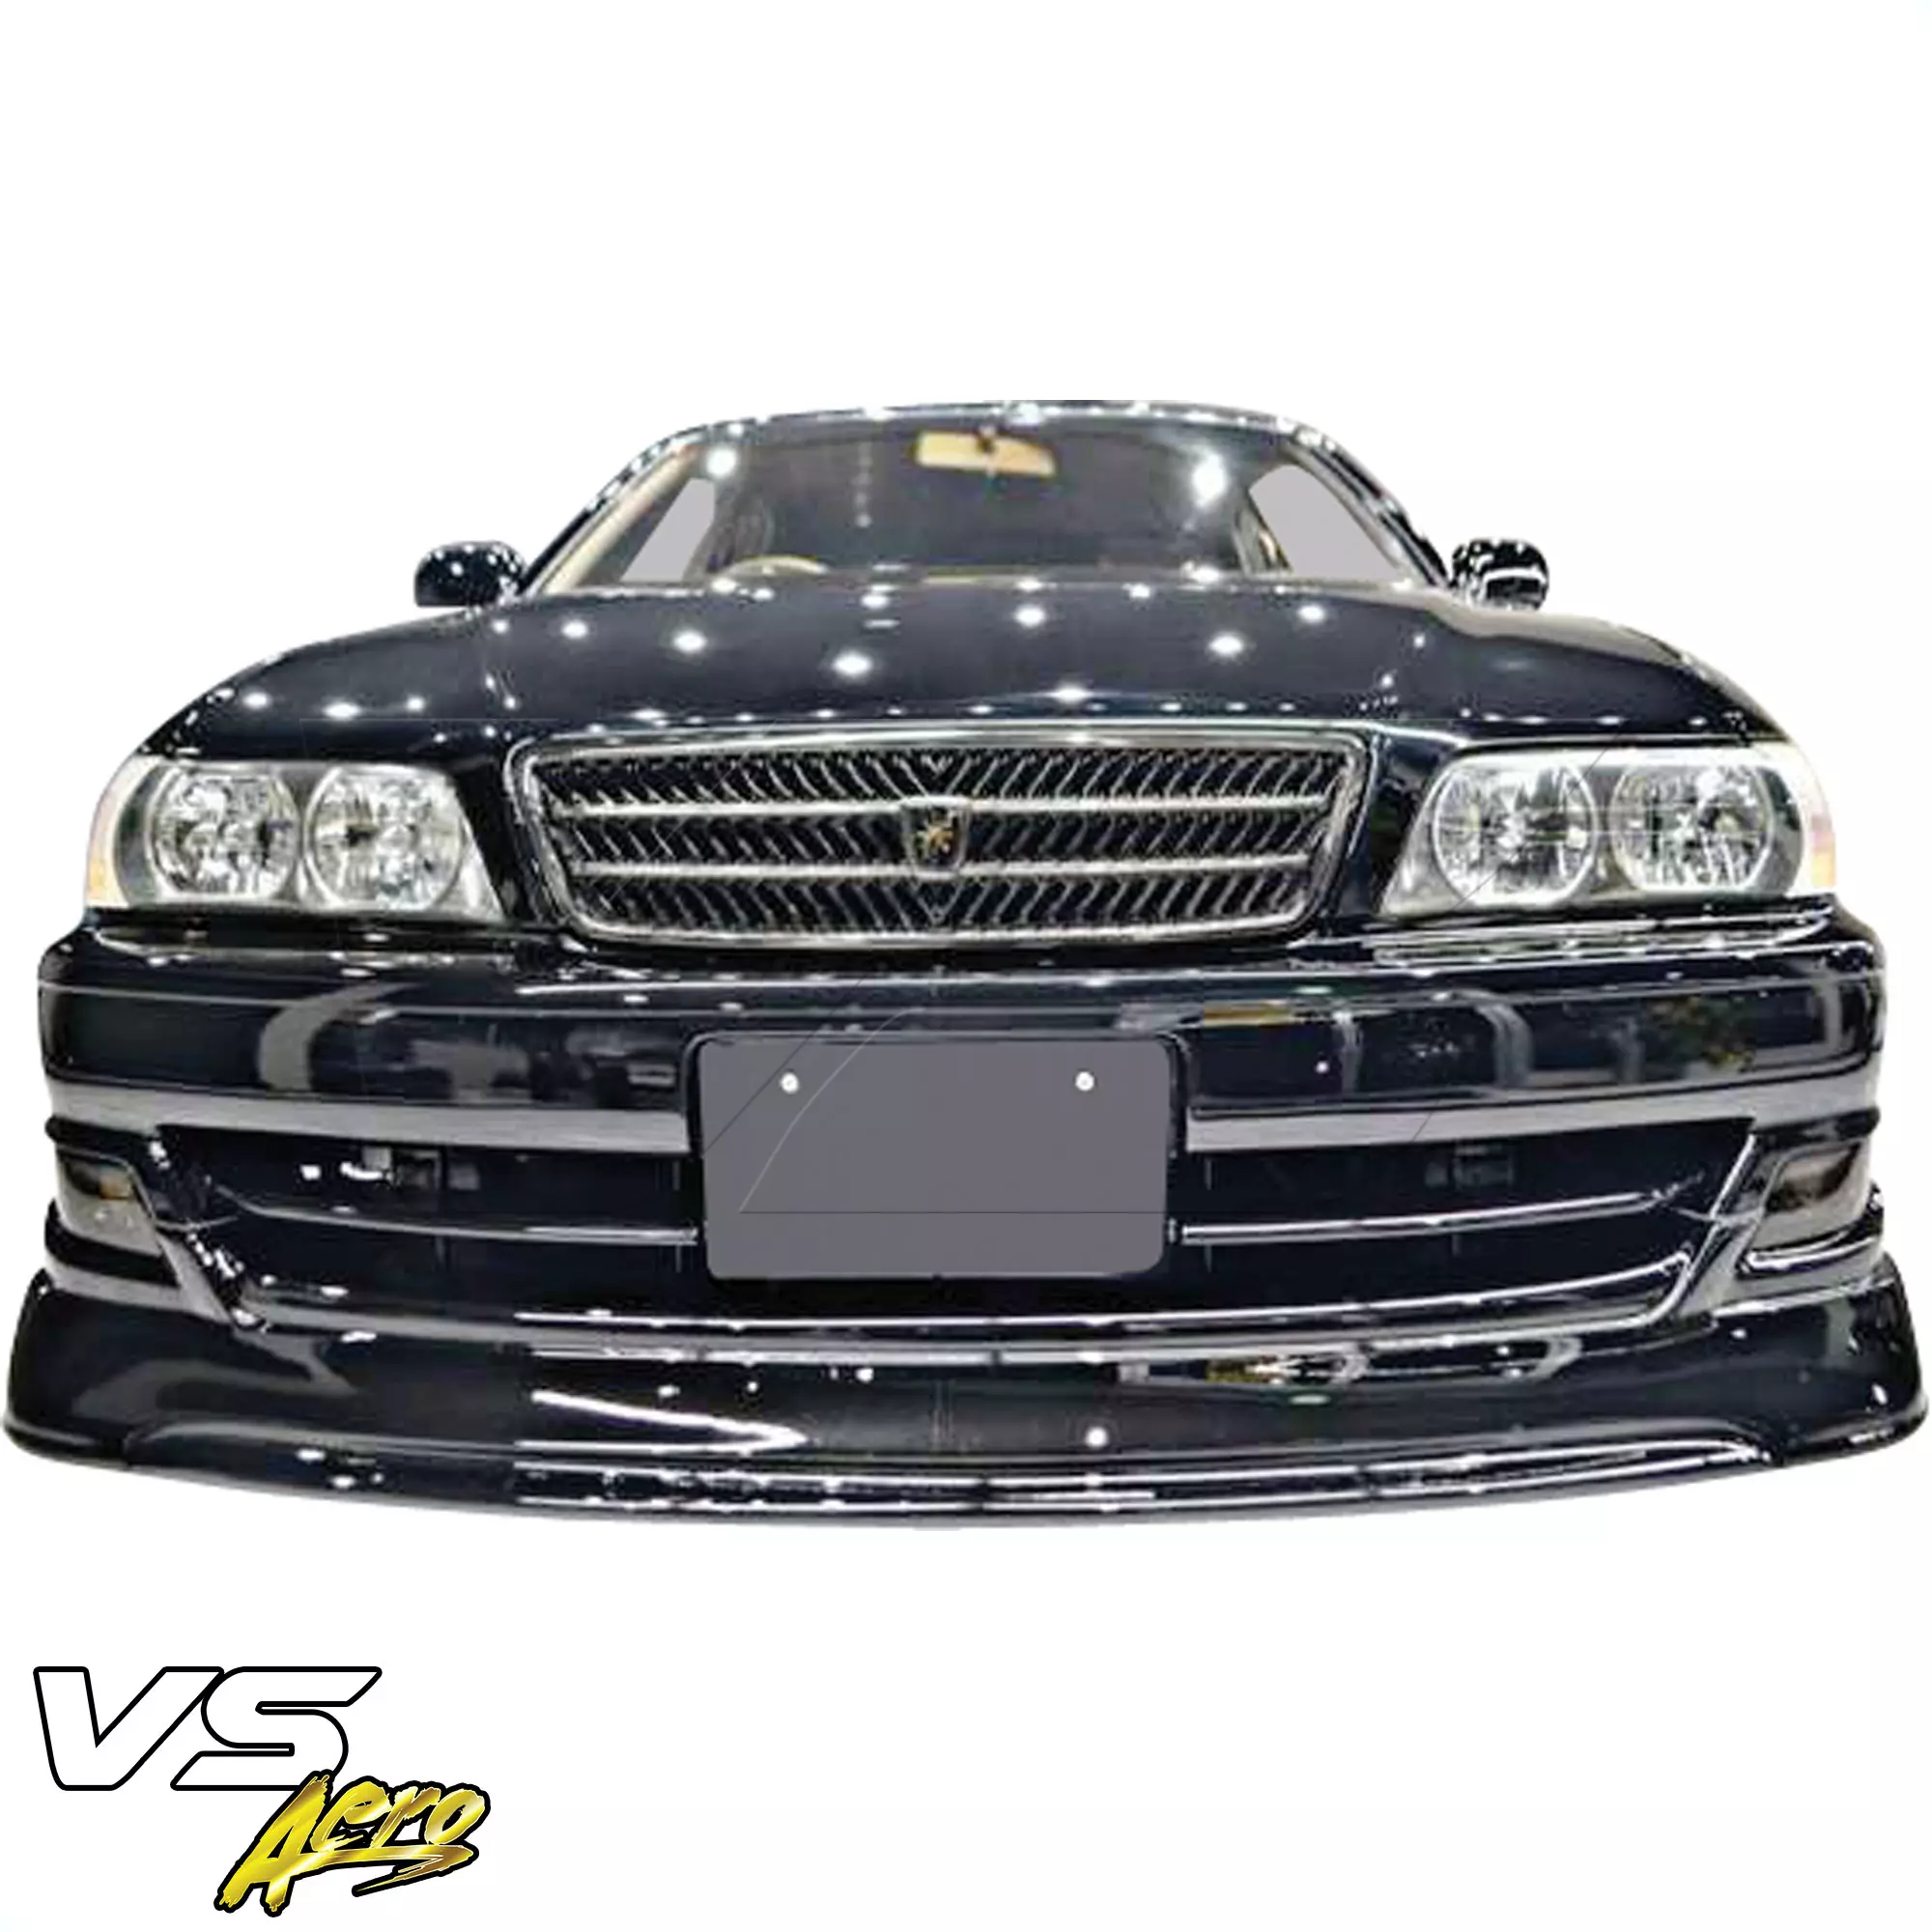 VSaero FRP TRAU Late Front Lip Valance > Toyota Chaser JZX100 1999-2000 - Image 15